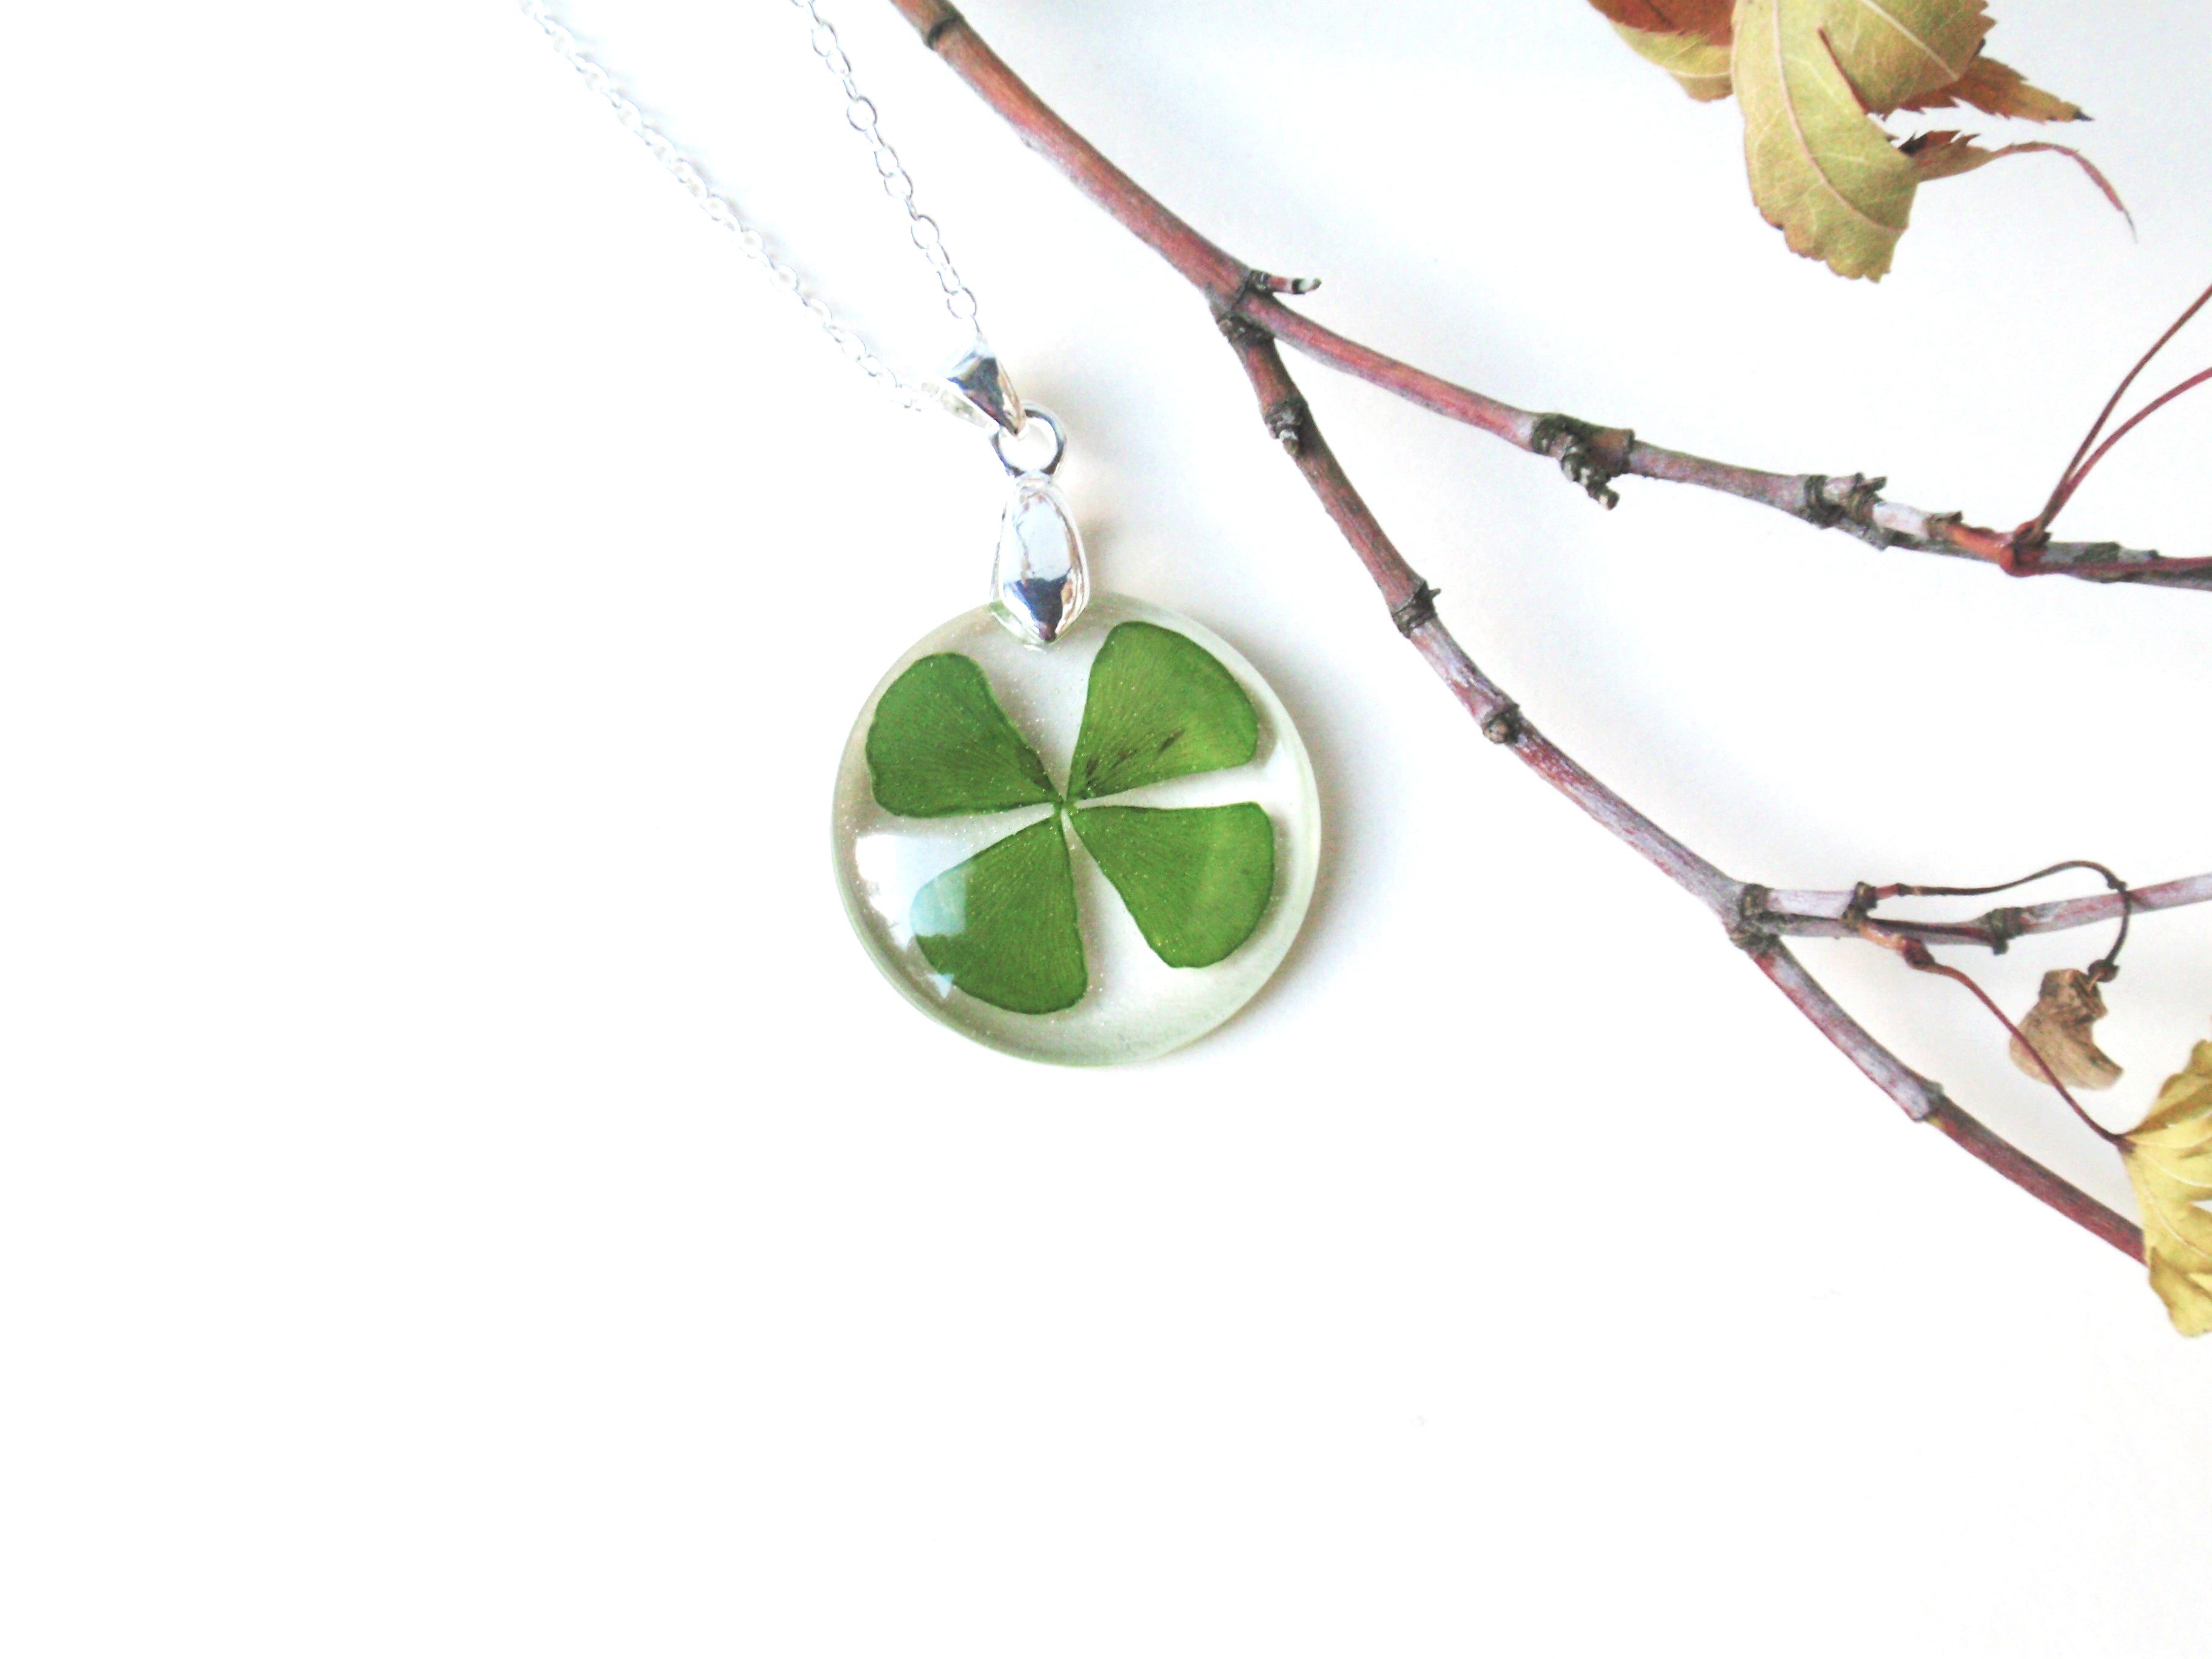 Wax seal green clover necklace. Tiny four leaf clover organically formed by  hand with recycled silver